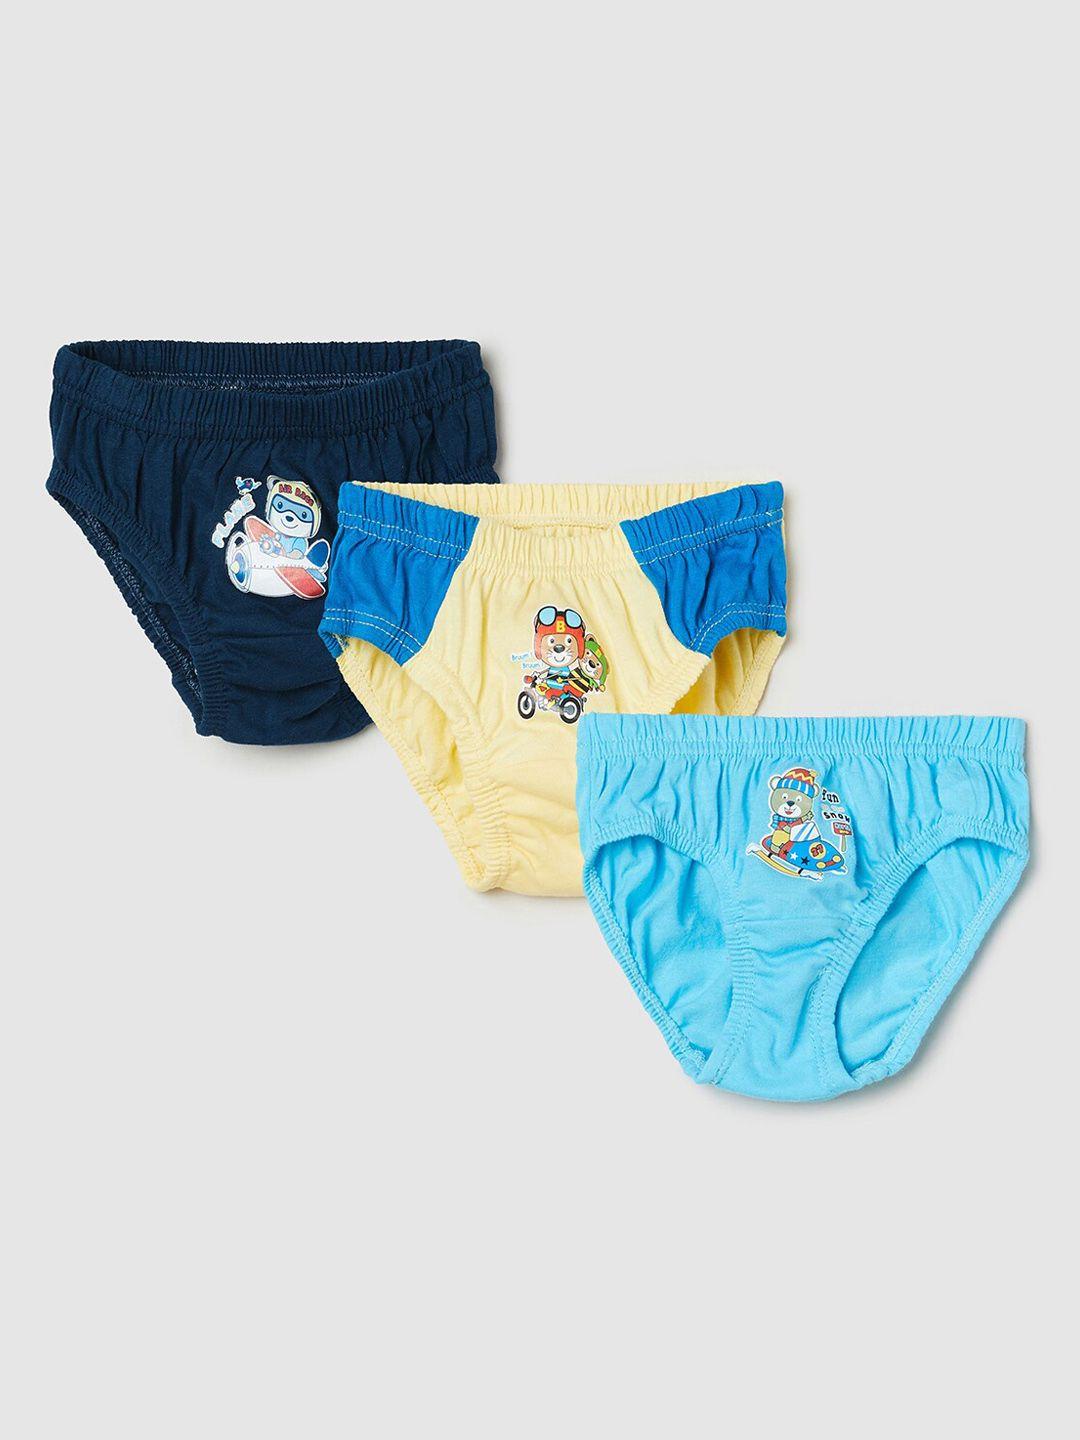 max boys blue and yellow pack of 3 printed basic cotton briefs